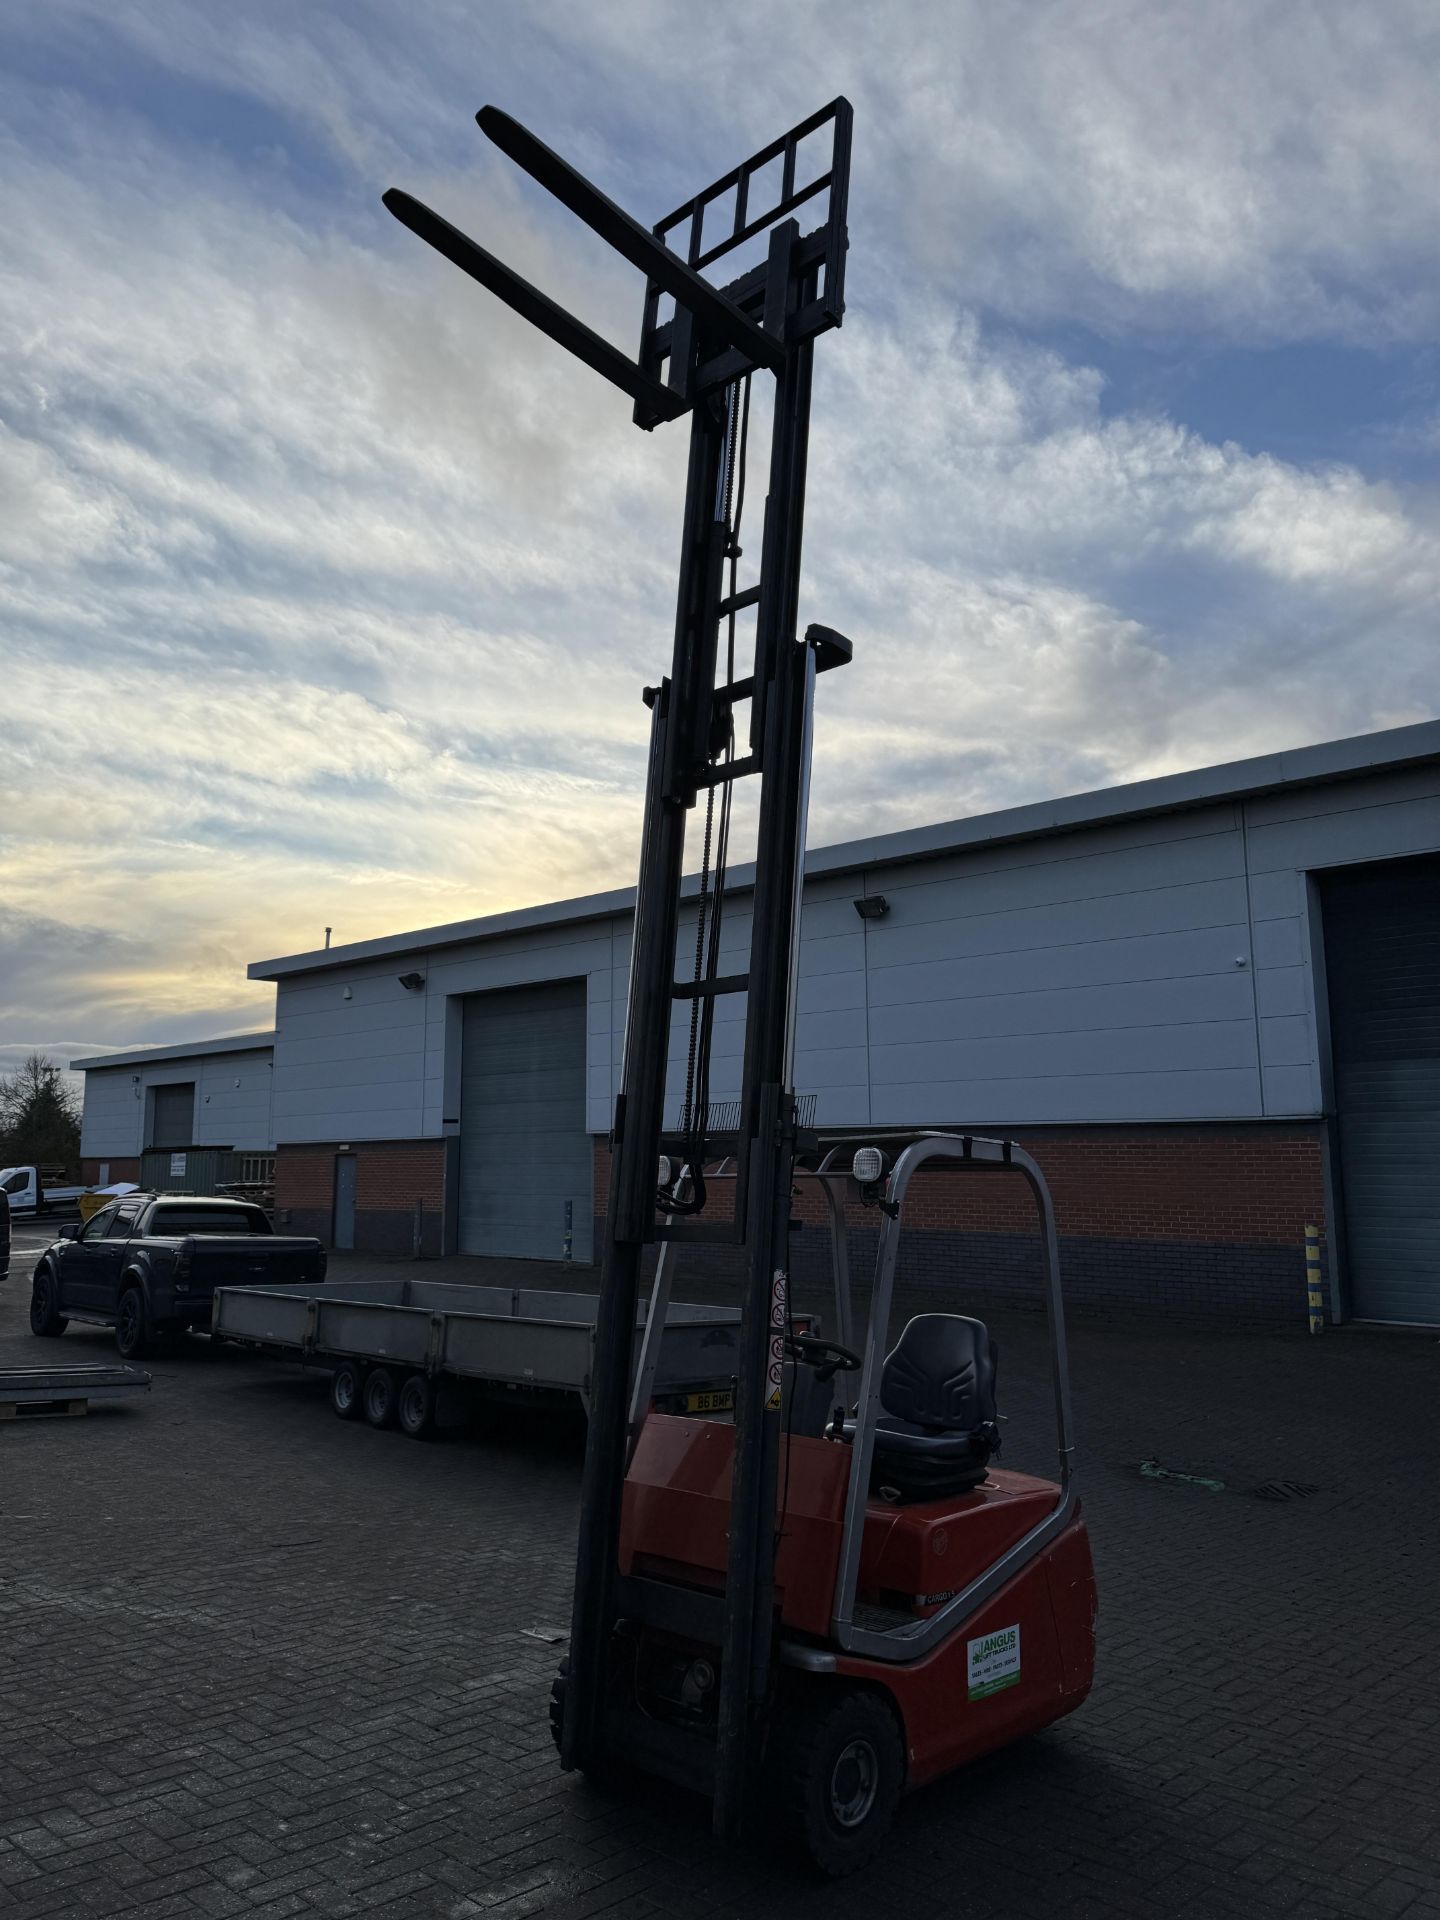 Cargo Model C 3 E 150 Tri Wheel Container Specification Electric Reach Truck - Image 11 of 28